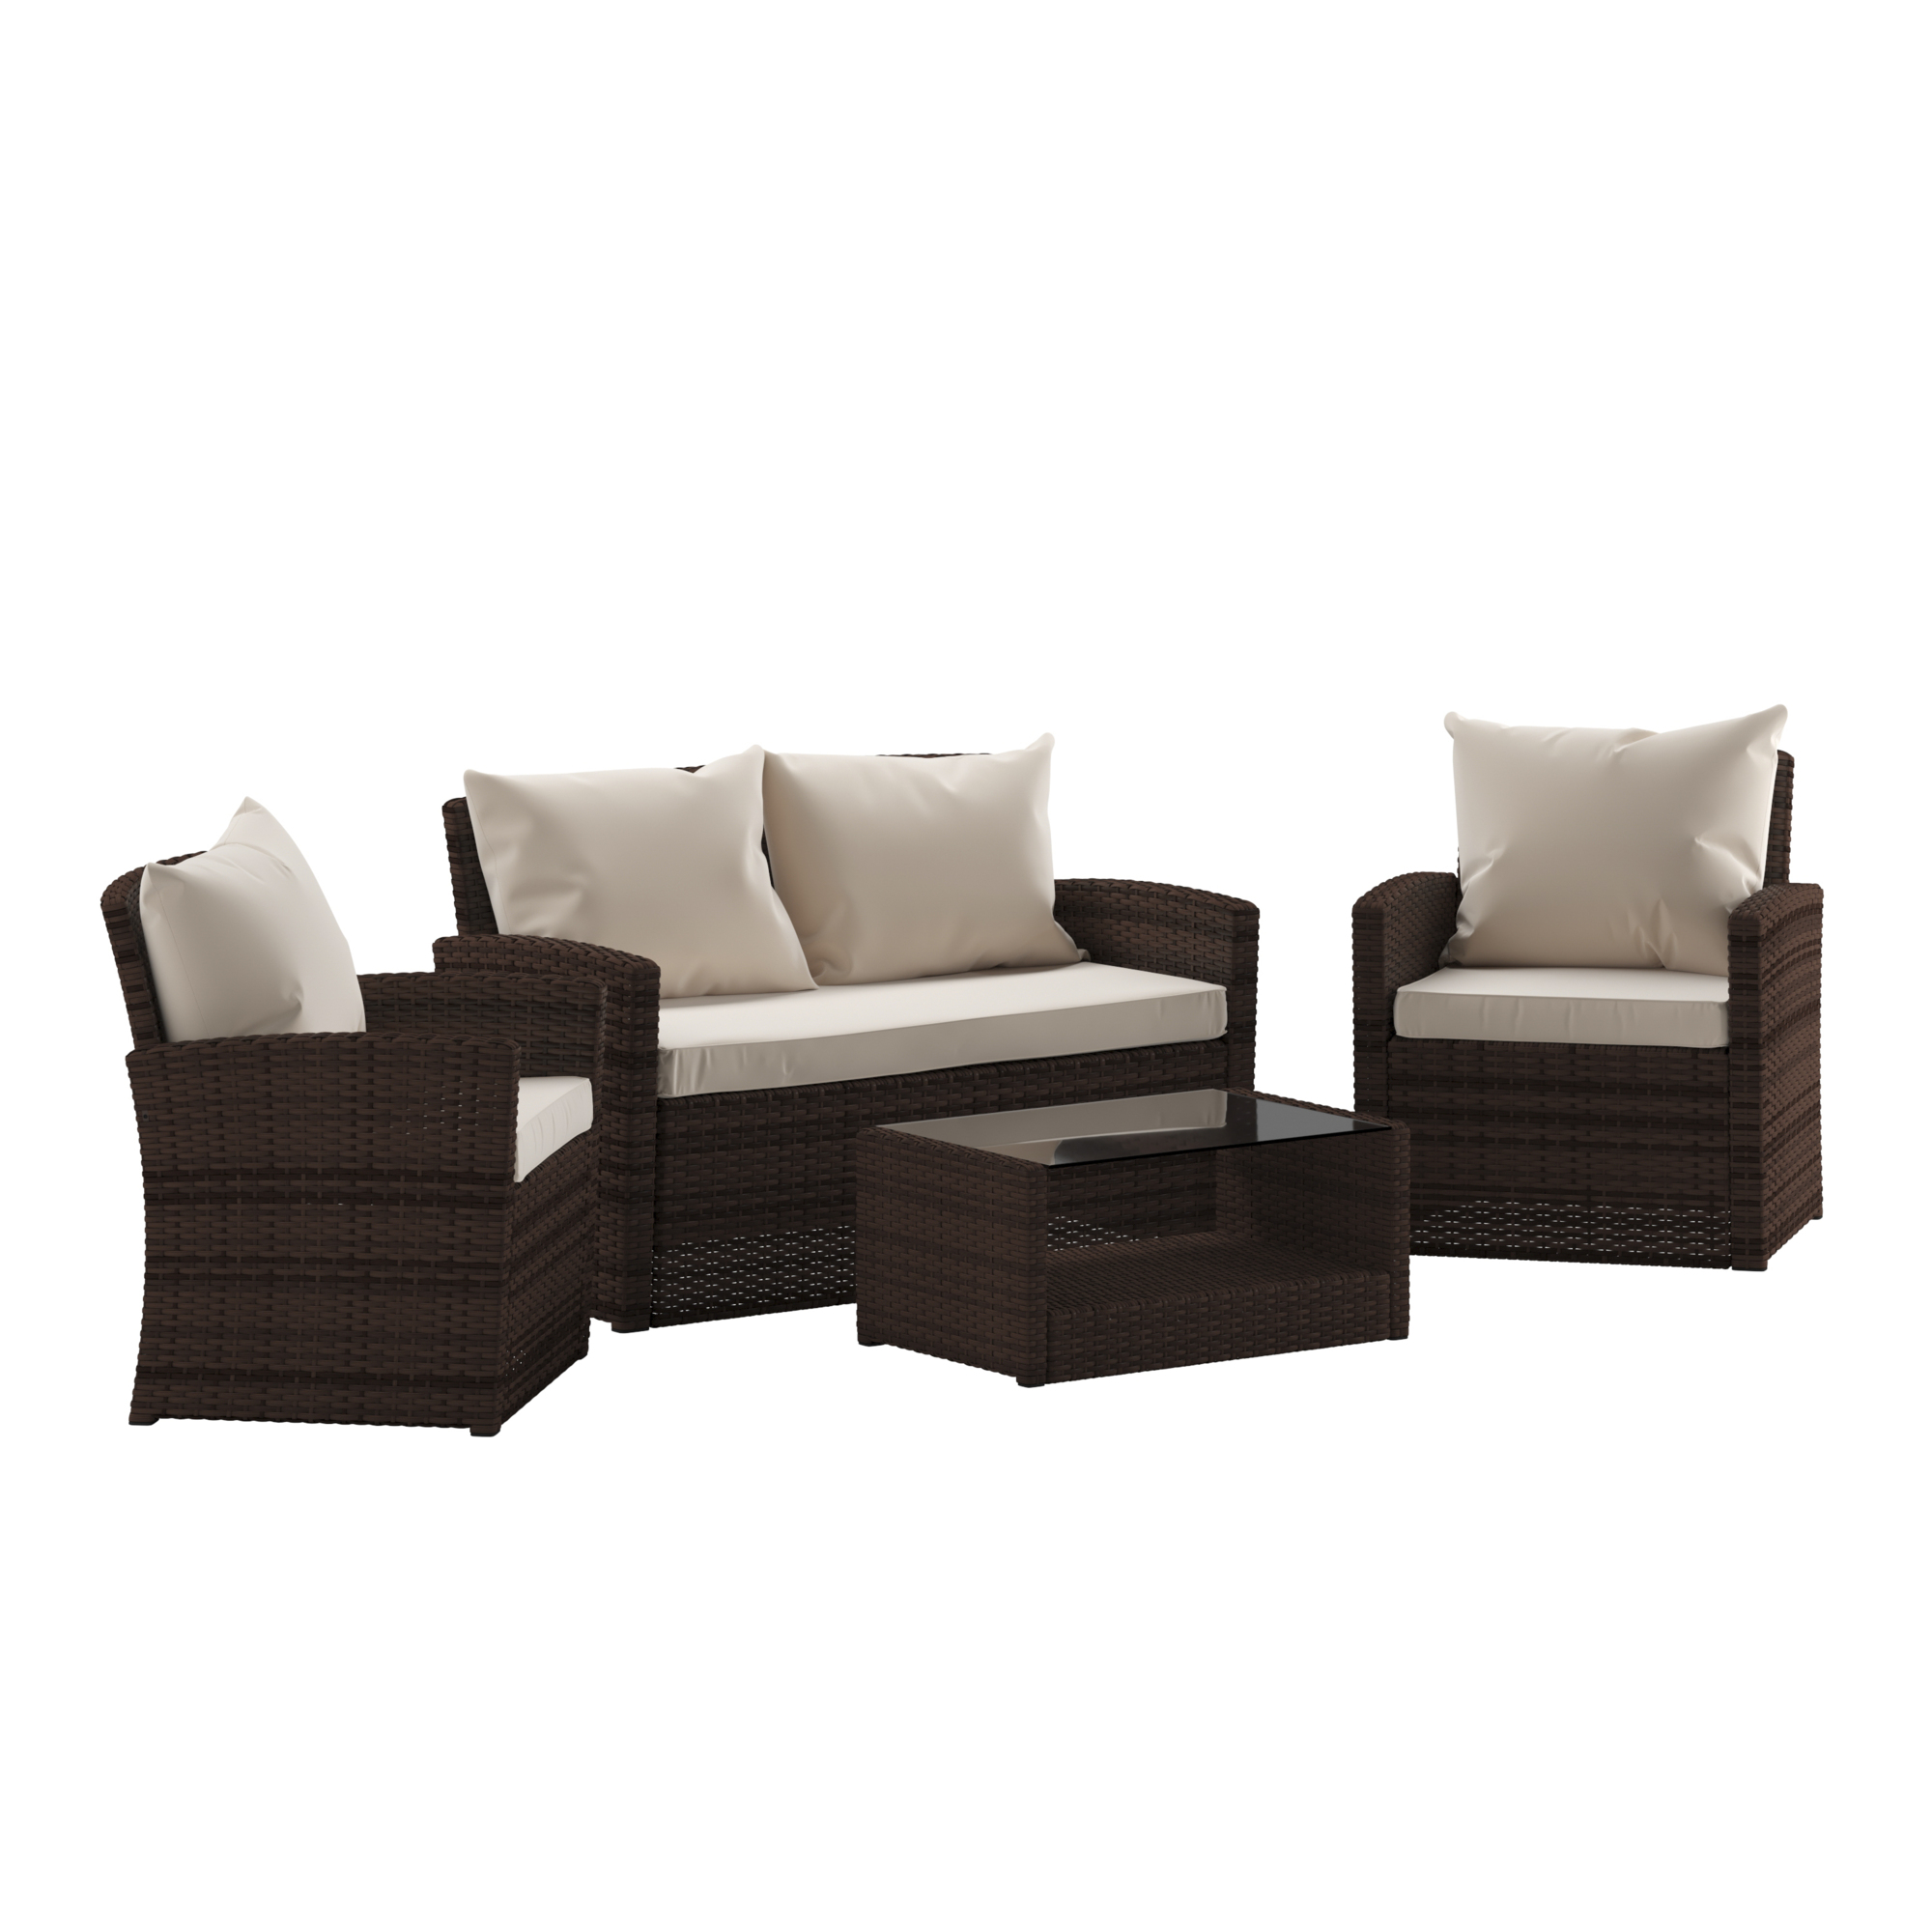 Flash Furniture, 4 Piece Brown Patio Set with Beige Back Pillows, Pieces (qty.) 4 Primary Color Brown, Seating Capacity 4 Model JJS351BNBG